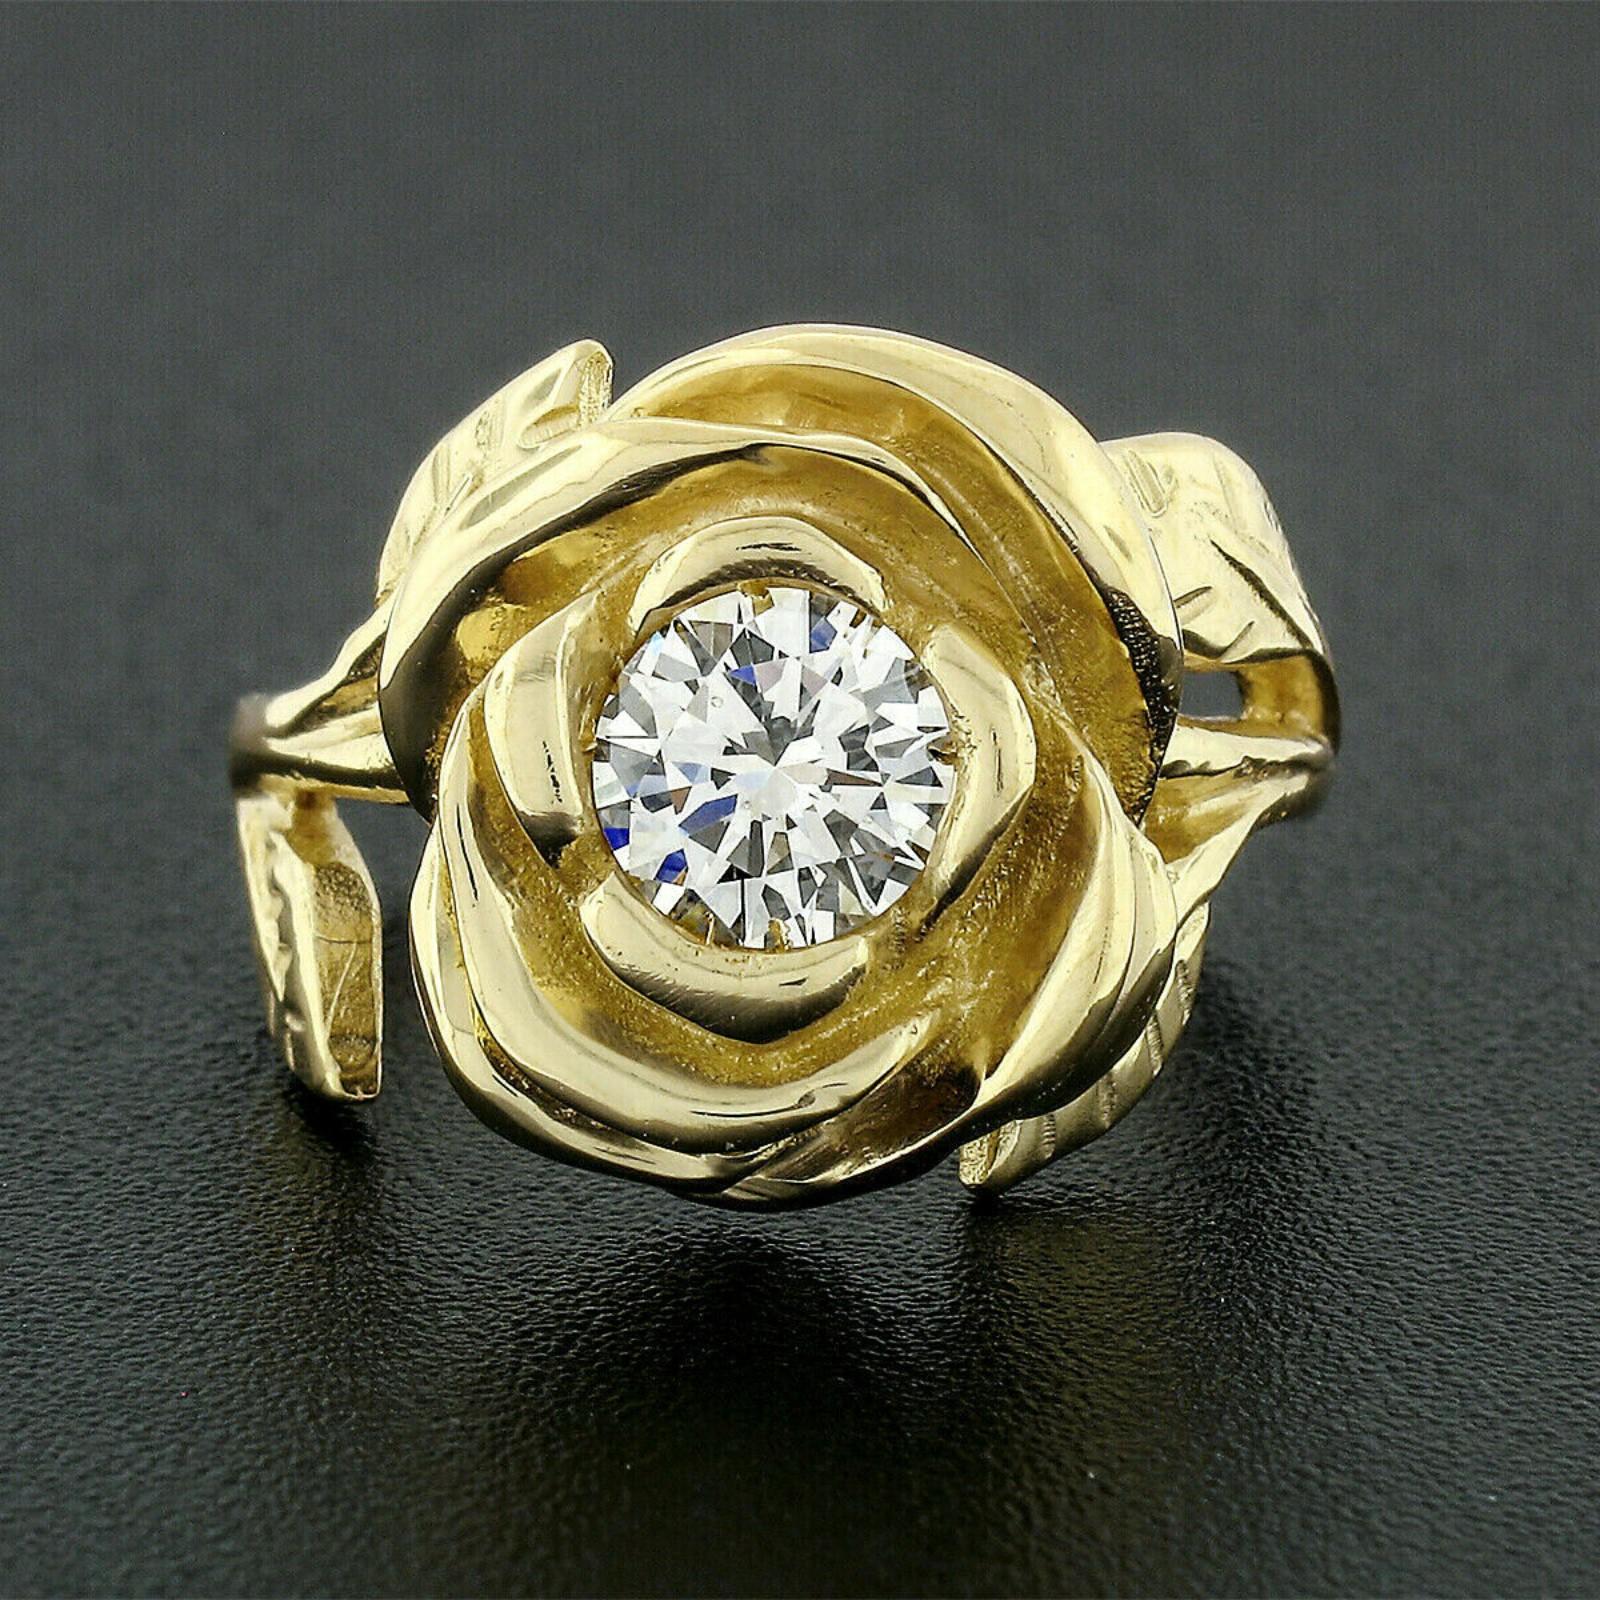 Here we have a gorgeous diamond rose flower ring hand crafted in solid 18k yellow gold. The ring features a very unique and truly heart warming rose flower design, prong set with a round brilliant cut at its center. This solitaire diamond weighs